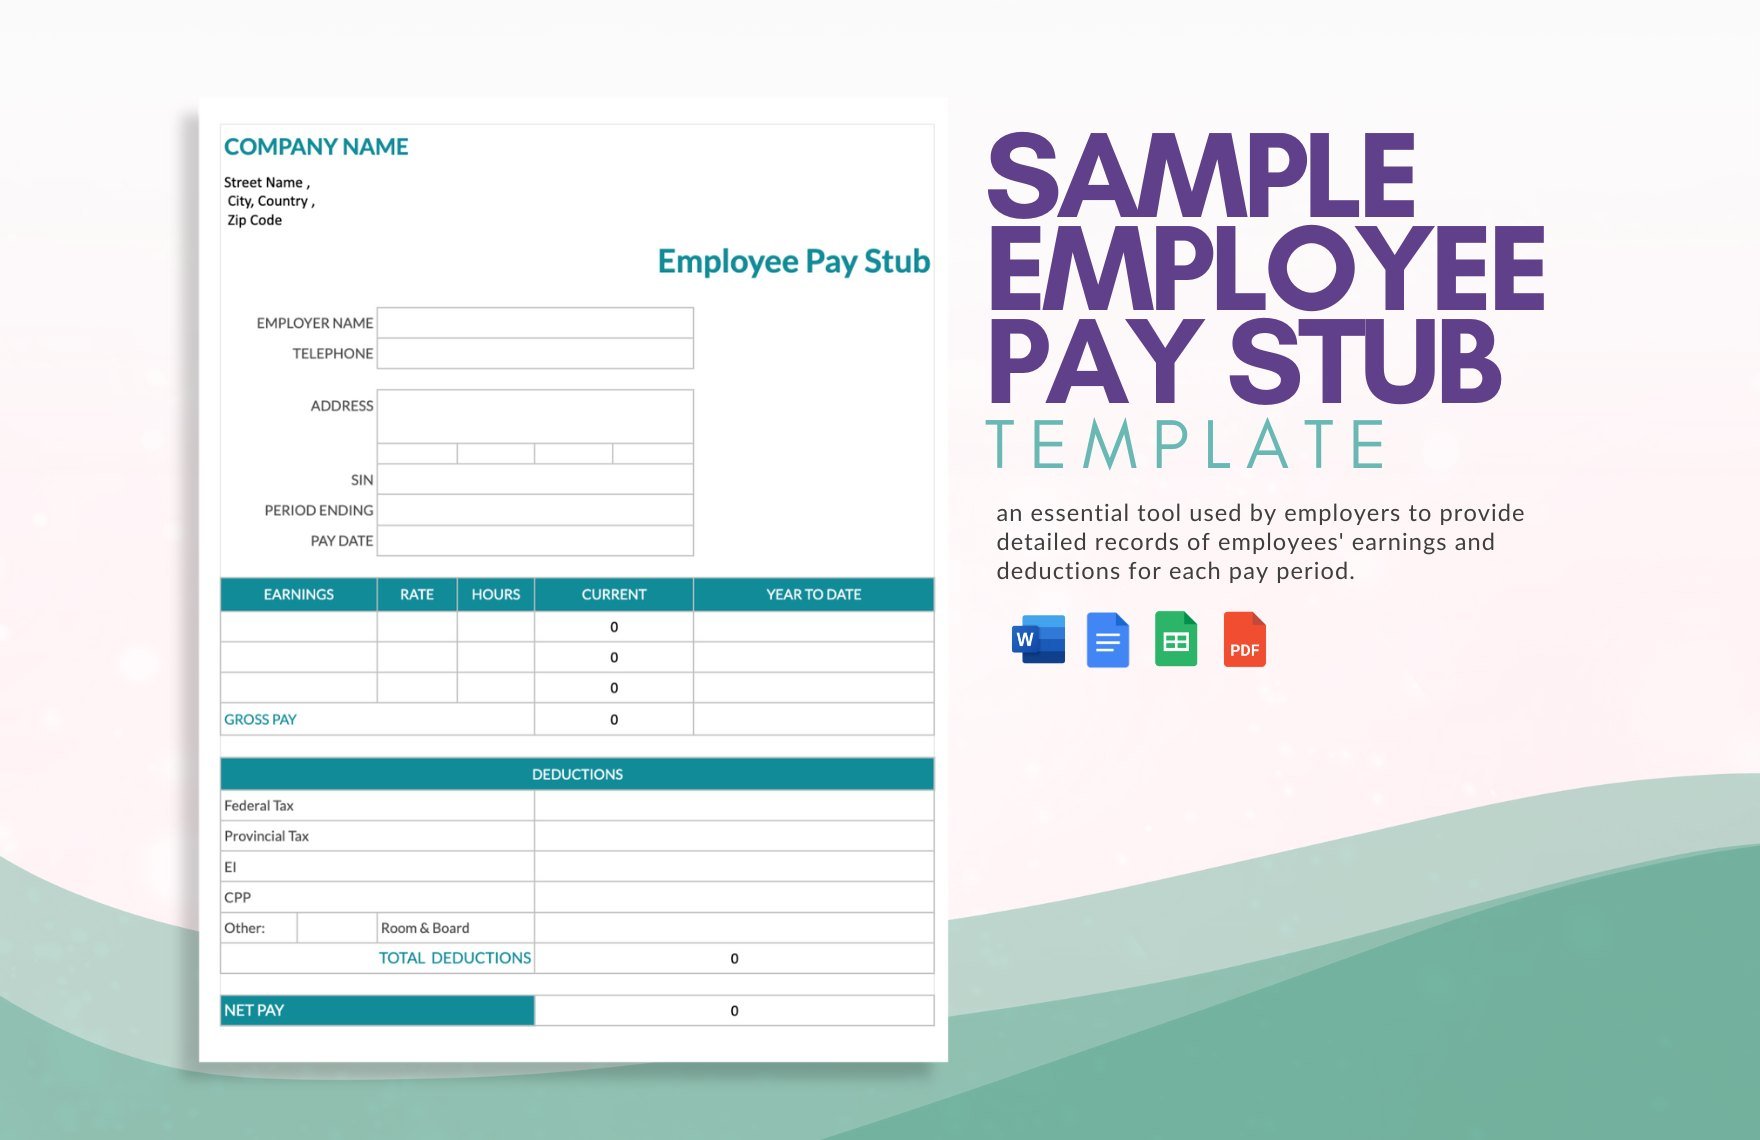 Sample Employee Pay Stub Template in Word, Google Docs, PDF, Google Sheets